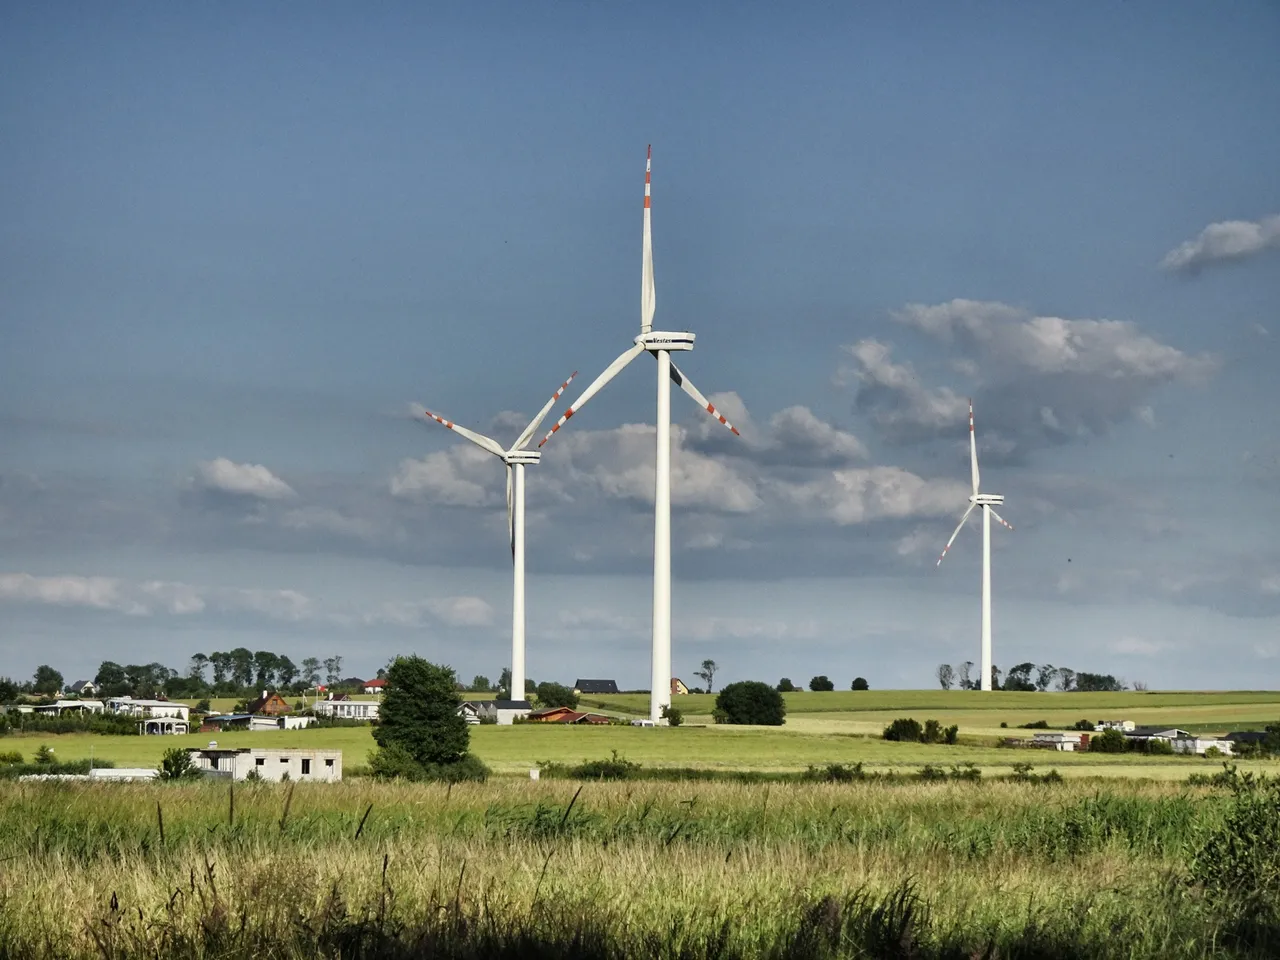 The coal country builds wind power engines